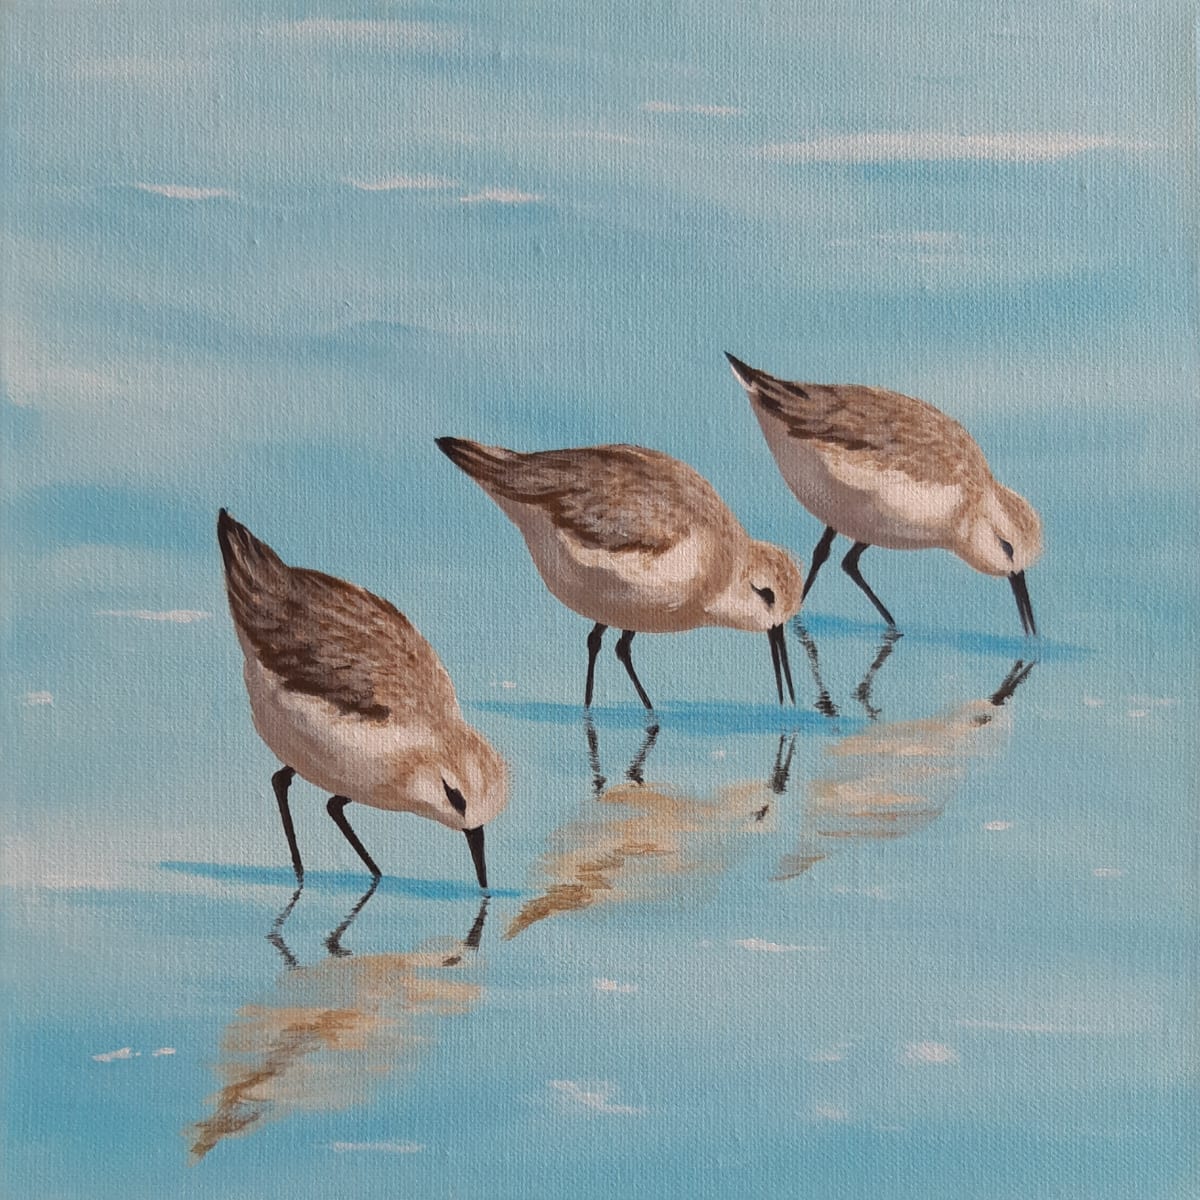 Shore Birds by Jane Thuss  Image: Sanderlings see their reflections as they search for food along the shore line. 